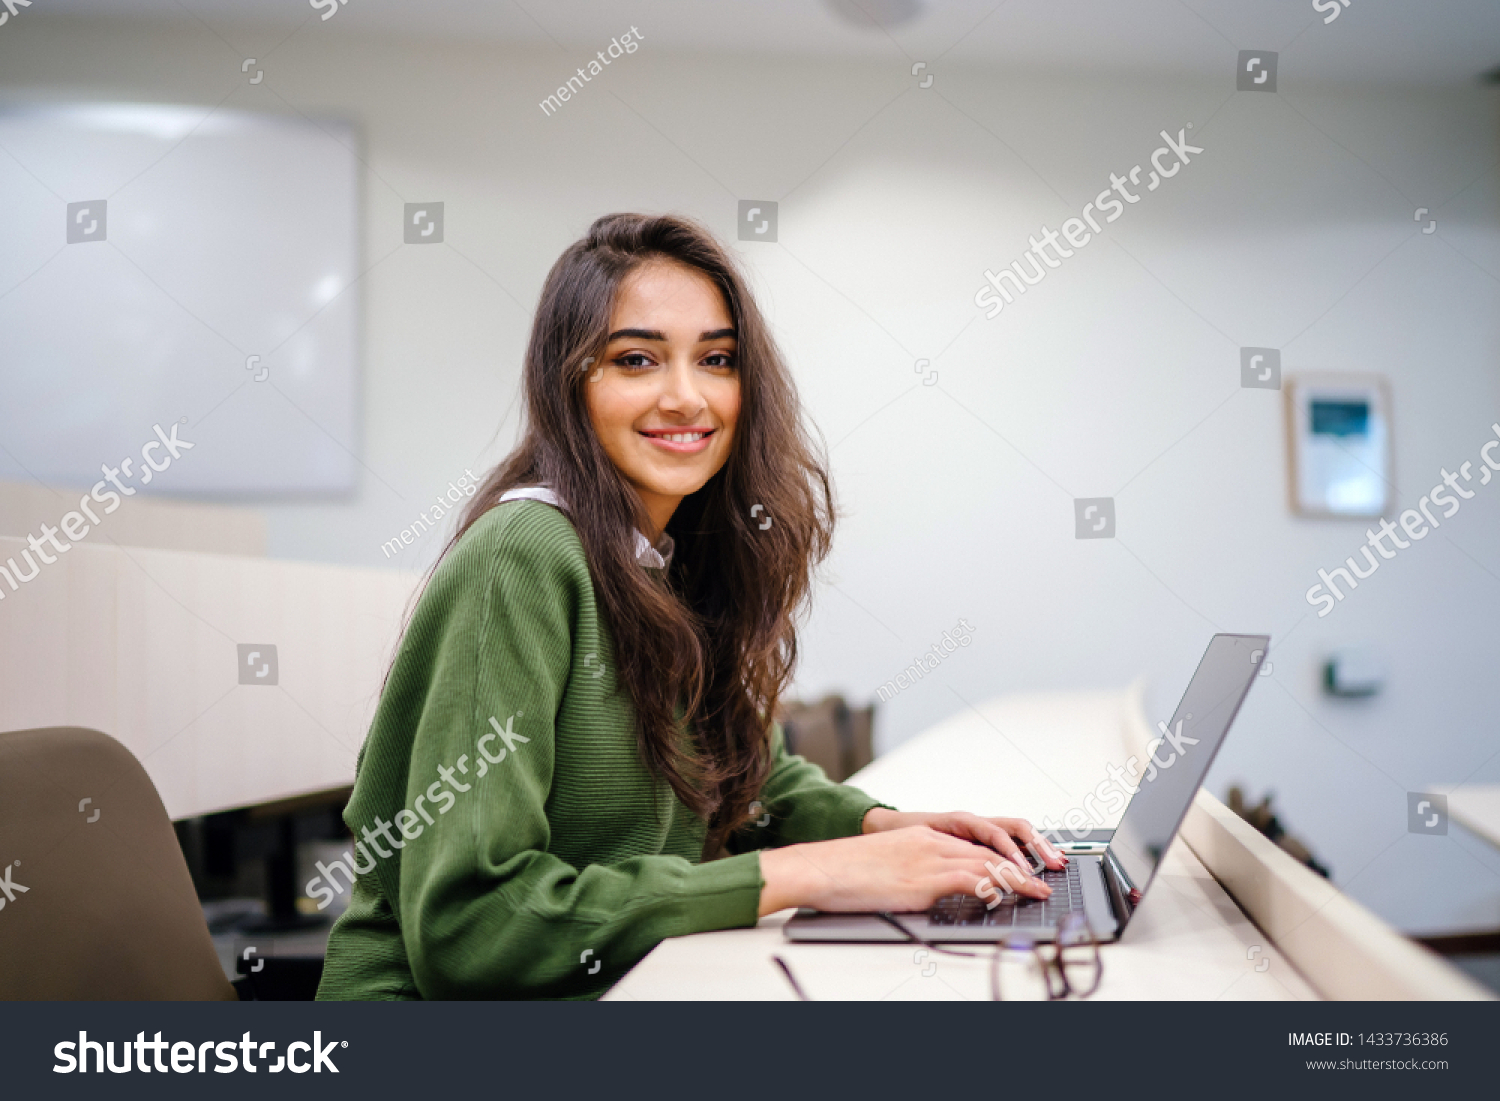 Portrait of a beautiful, young and intelligent-looking Indian Asian woman student wearing a white shirt and green tracker smiling as she works on her laptop in a university classroom.  #1433736386